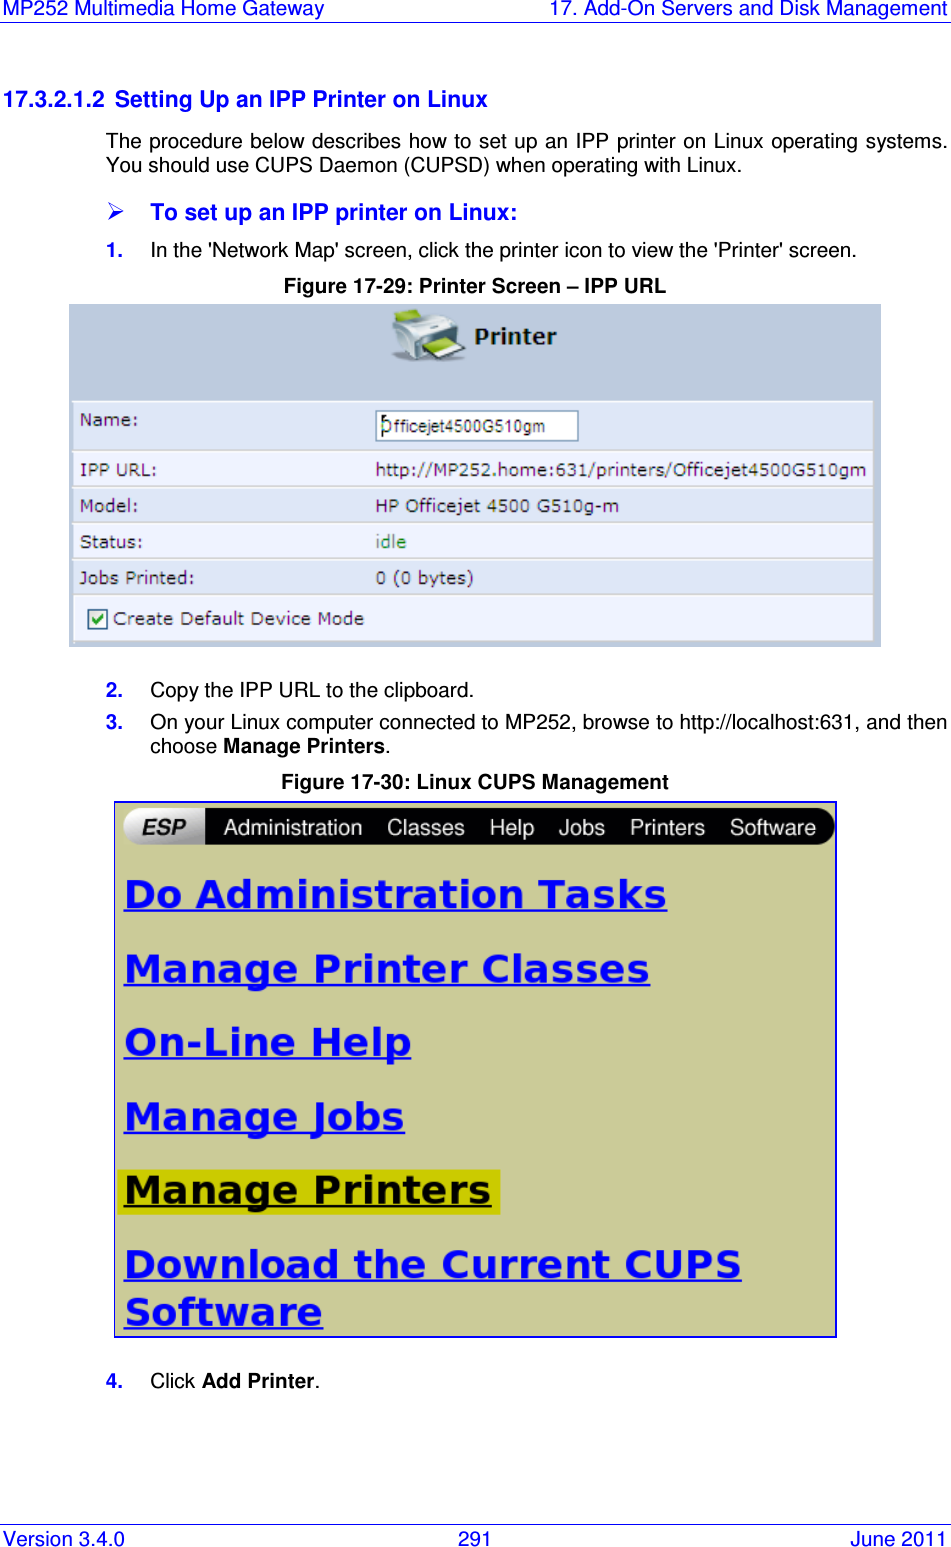 MP252 Multimedia Home Gateway  17. Add-On Servers and Disk Management Version 3.4.0  291  June 2011 17.3.2.1.2  Setting Up an IPP Printer on Linux The procedure below describes how to set up an IPP printer on Linux operating systems. You should use CUPS Daemon (CUPSD) when operating with Linux.  To set up an IPP printer on Linux: 1.  In the &apos;Network Map&apos; screen, click the printer icon to view the &apos;Printer&apos; screen. Figure 17-29: Printer Screen – IPP URL  2.  Copy the IPP URL to the clipboard. 3.  On your Linux computer connected to MP252, browse to http://localhost:631, and then choose Manage Printers. Figure 17-30: Linux CUPS Management  4.  Click Add Printer. 